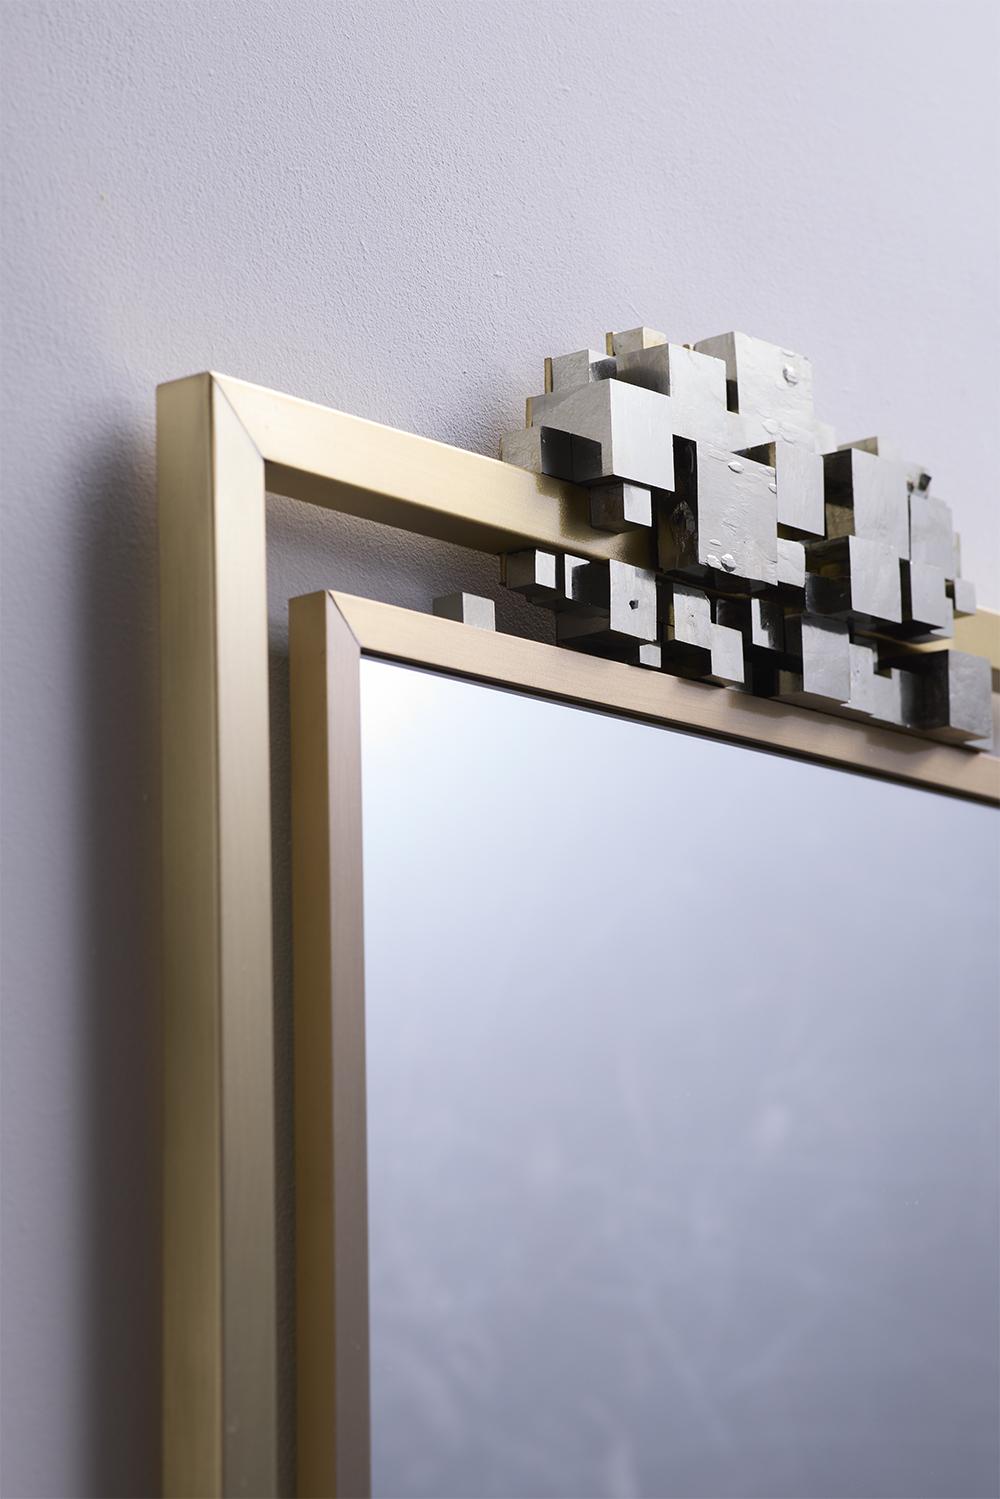 Set of pyrites around a mirror.

__

Creation : Antoine DARIULE 

Antoine DARIULE is a metal artist and designer. 
He produces high-quality objets d'art, furniture and lighting. 

His favourite material is metal. An ideal material, a symbol of